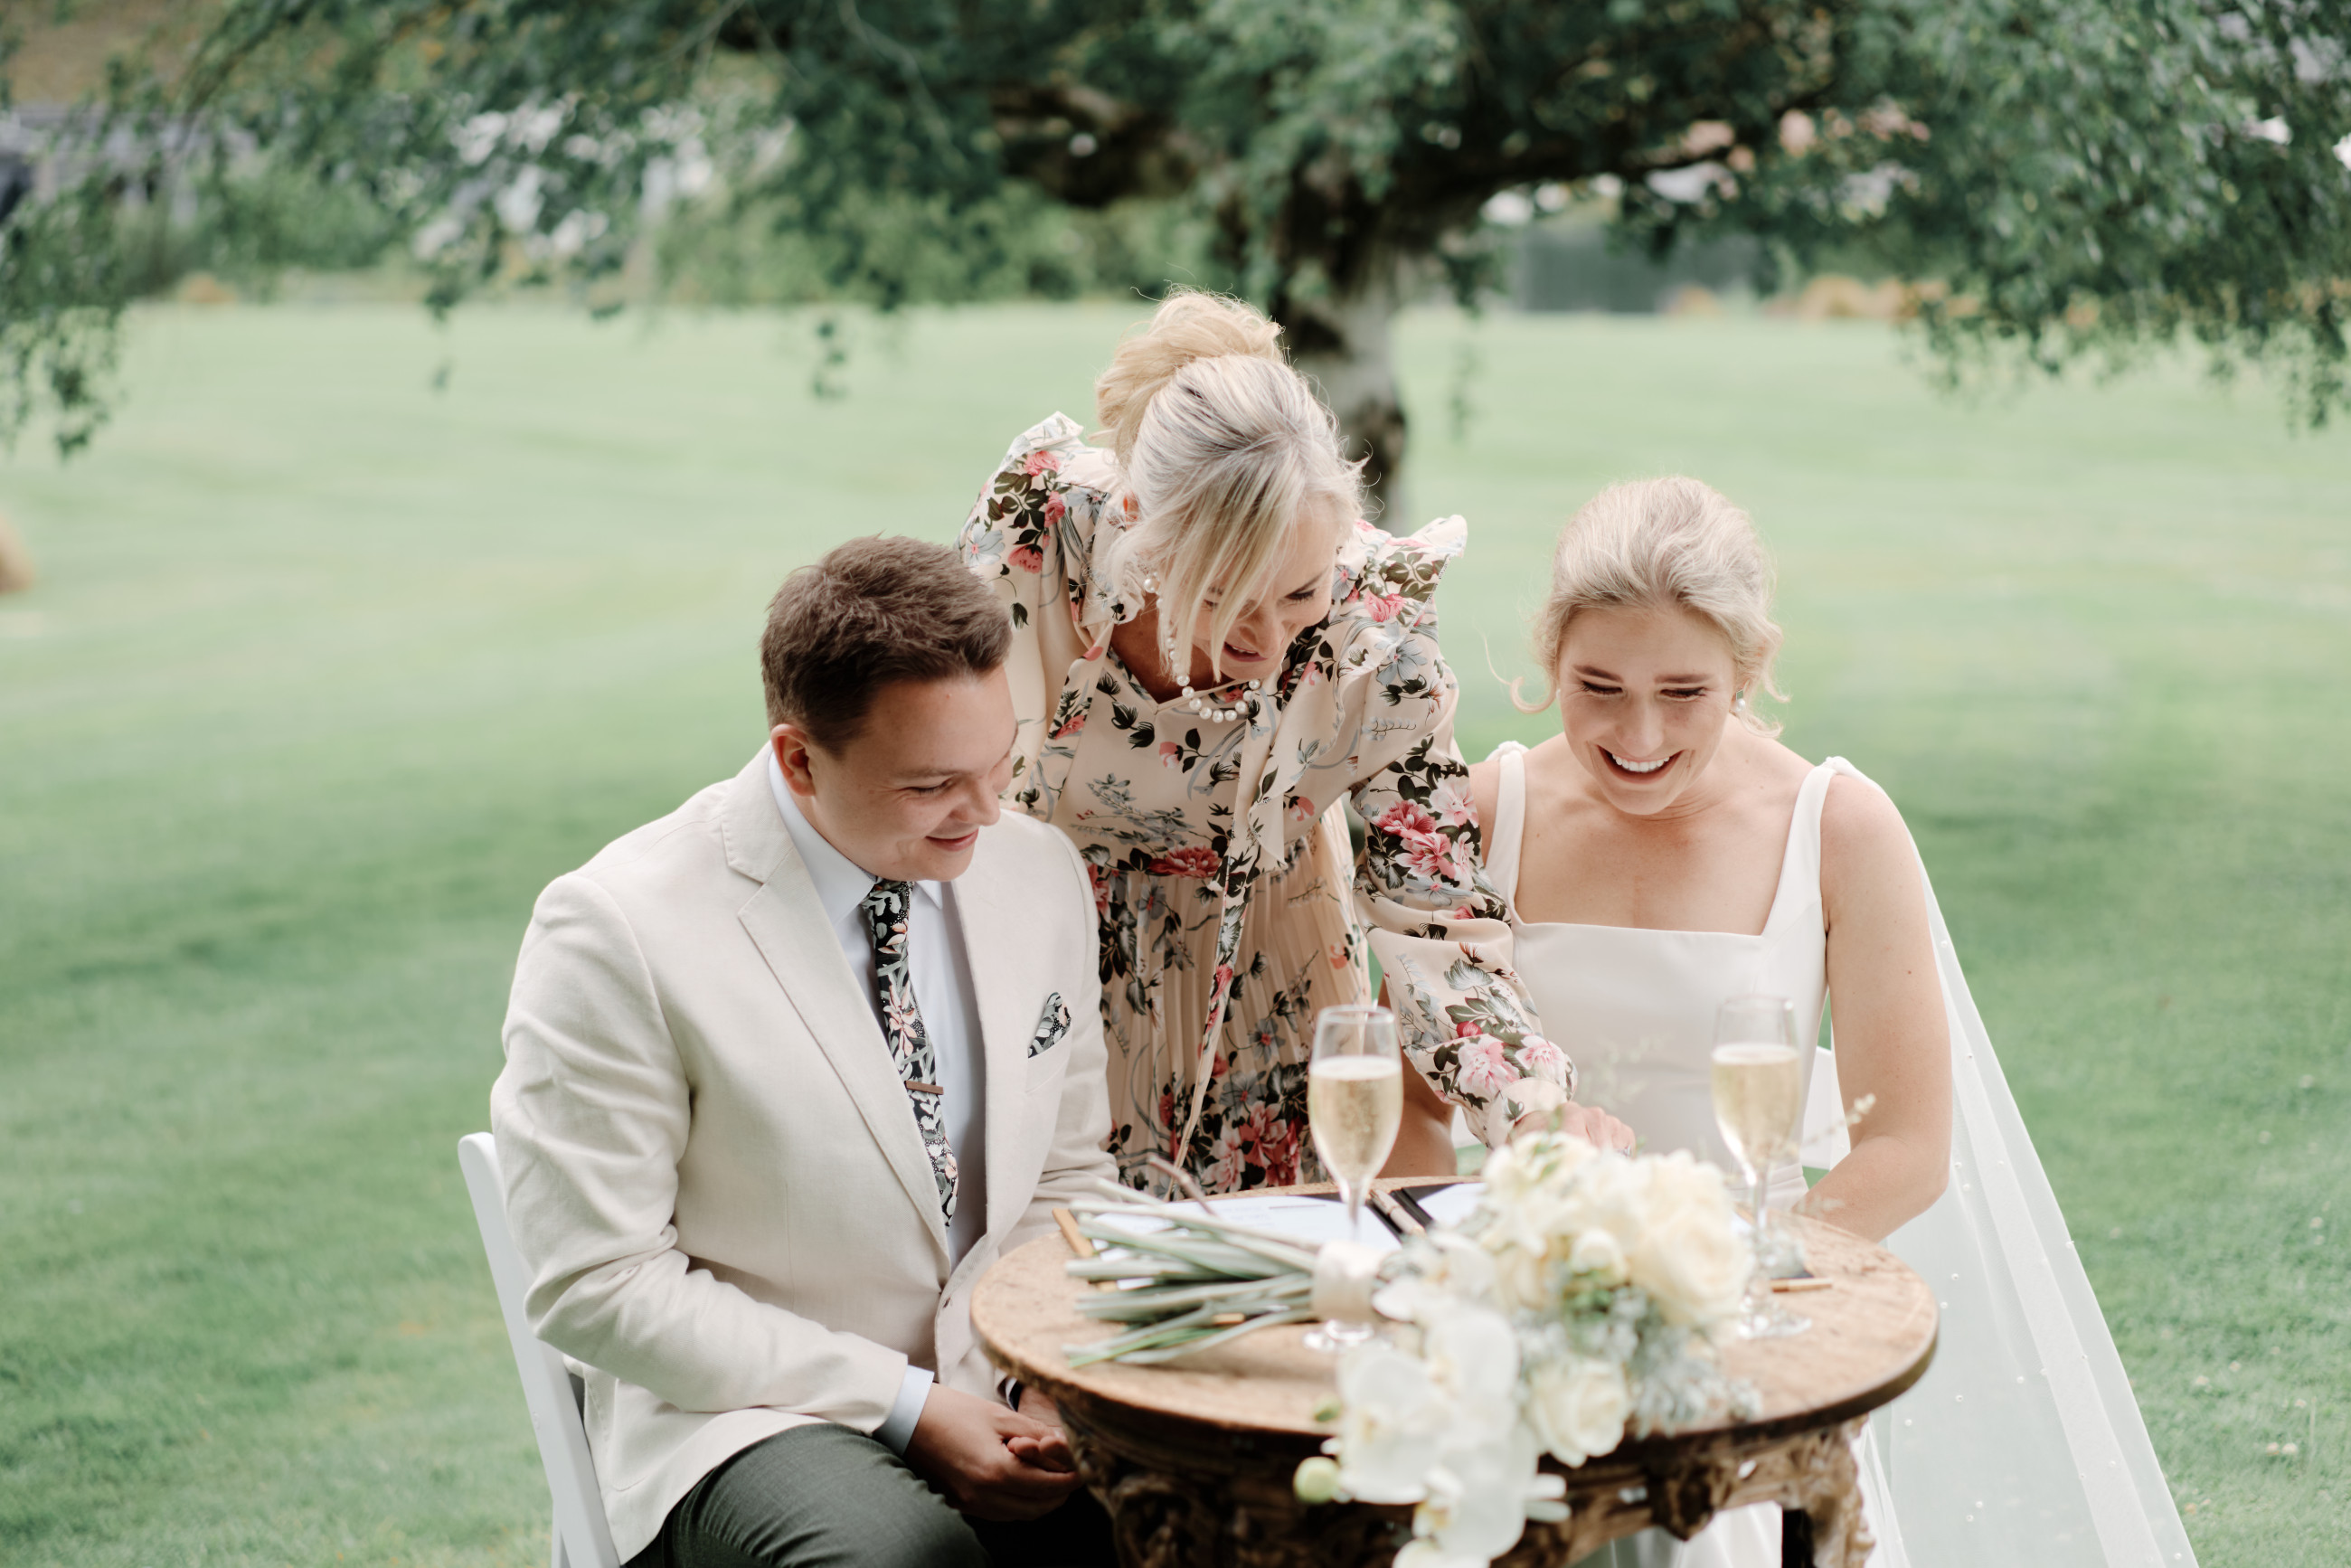 Couple and their celebrant laughing at the signing table. Two glasses of Champaign and bouquet of flowers sitting on table. Grassy lawns and a tree in the background